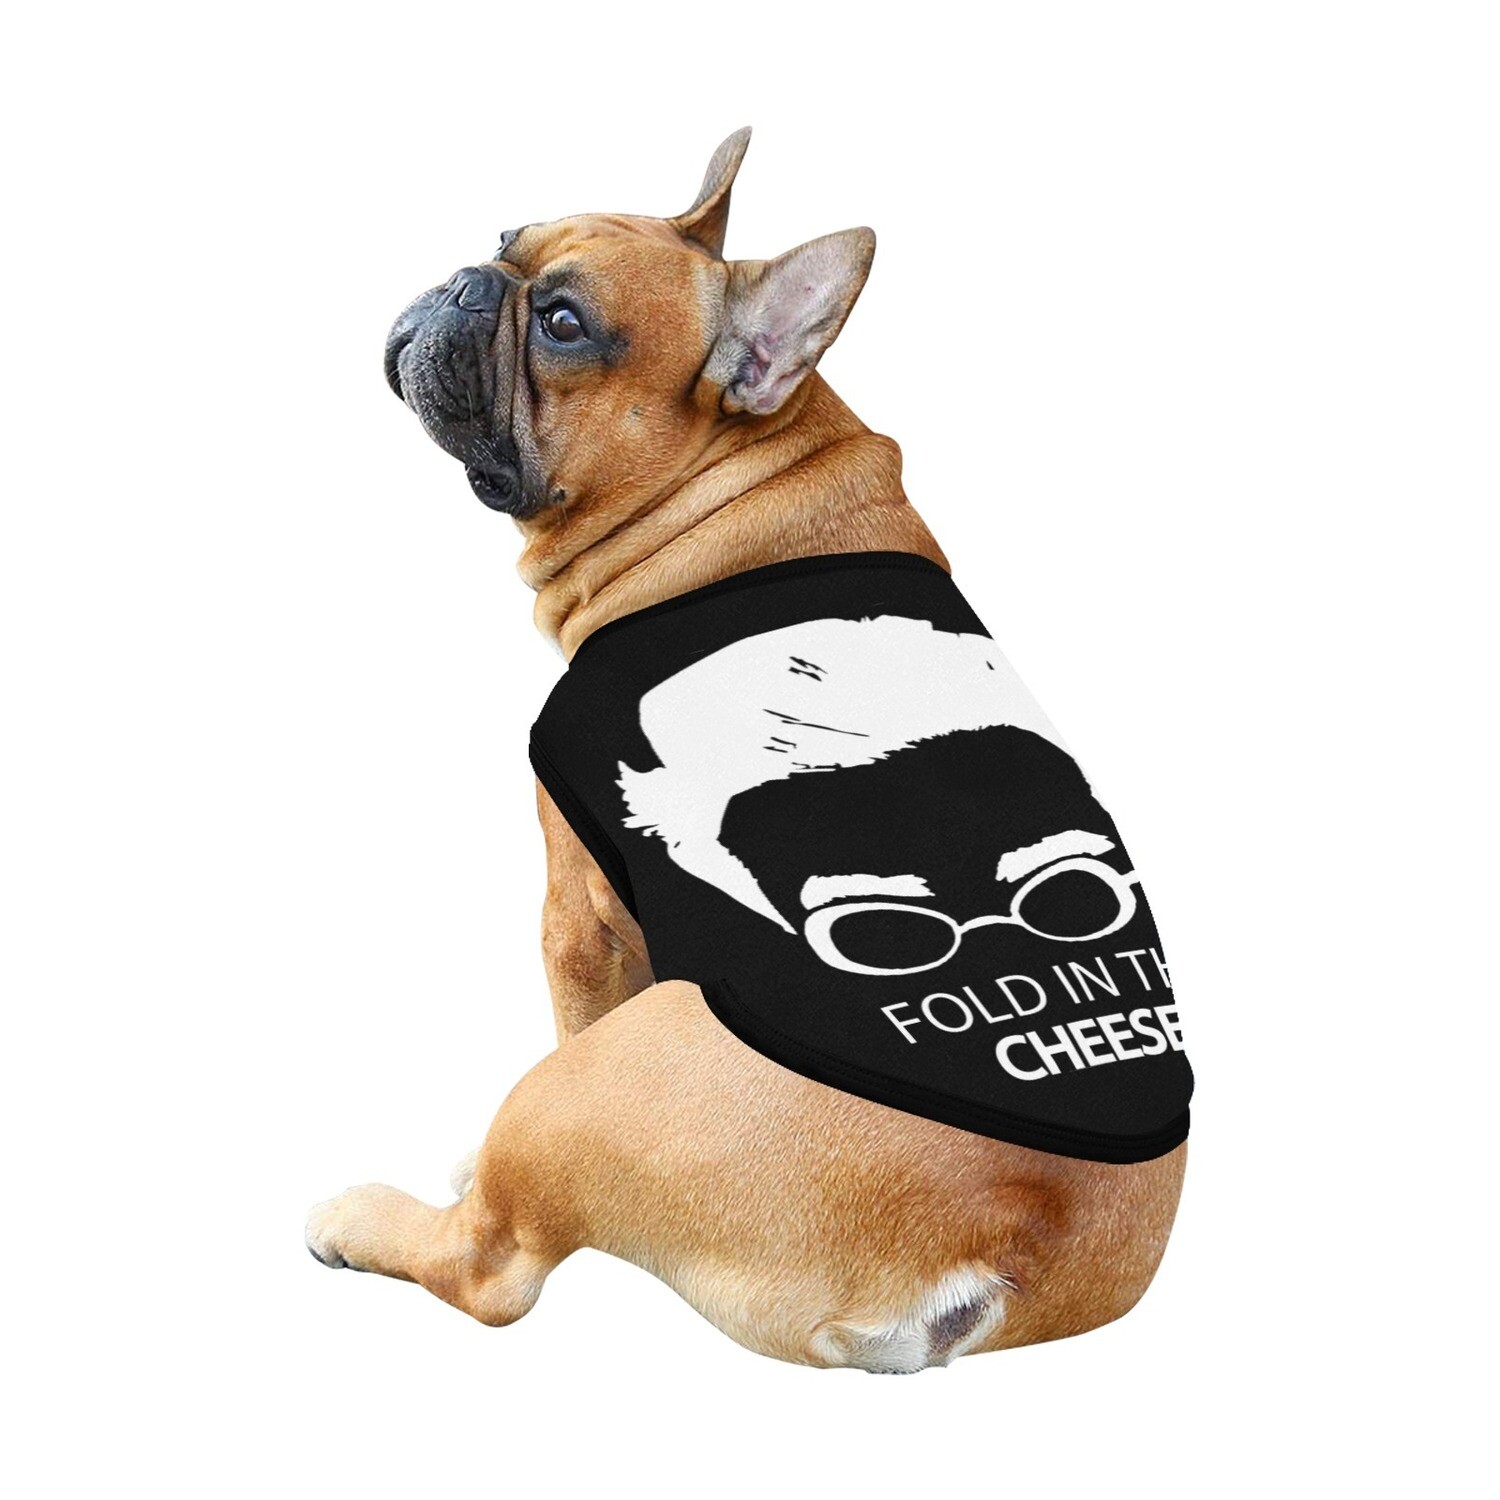 🐕 David Rose silhouette Fold in the cheese Dog t-shirt, Dog Tank Top, Dog shirt, Dog clothes, Gifts, front back print, 7 sizes XS to 3XL, Schitt's Creek, TV series